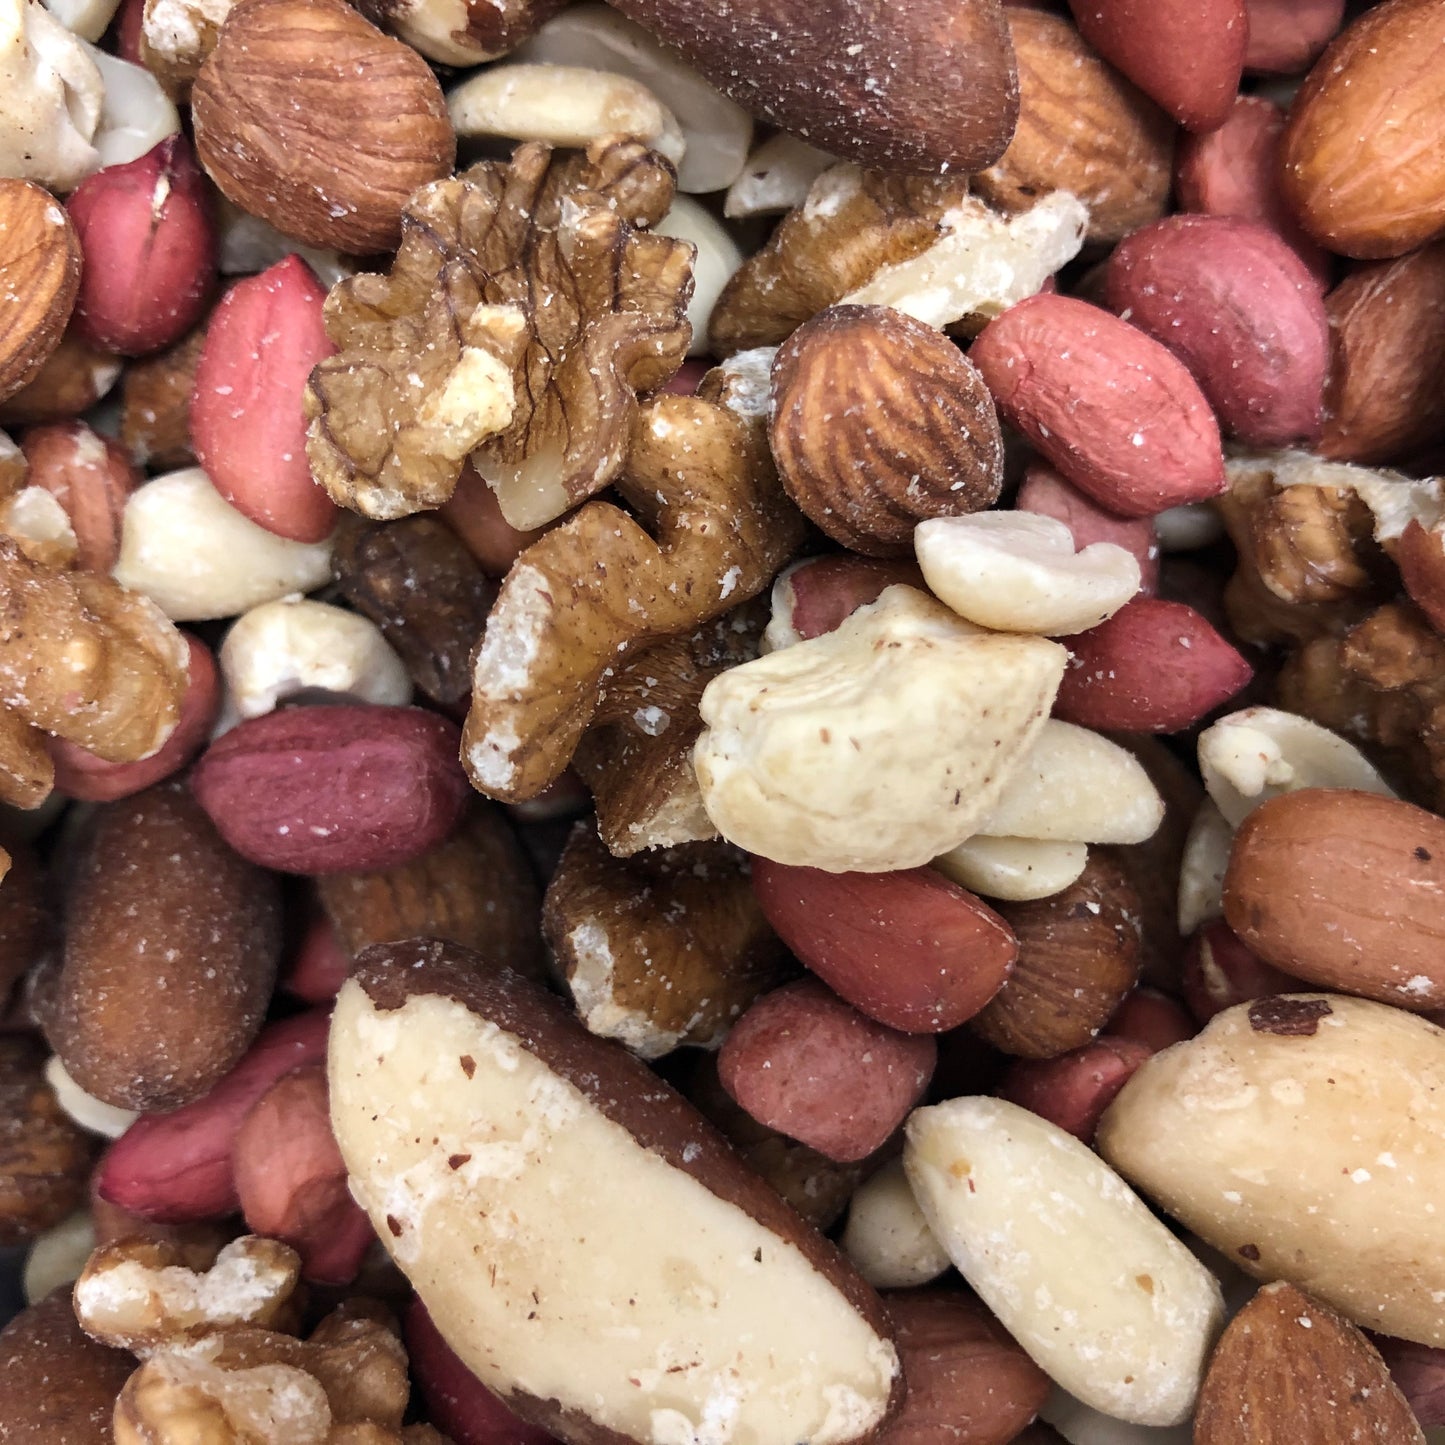 Nuts: Mixed Nuts (with Peanuts)